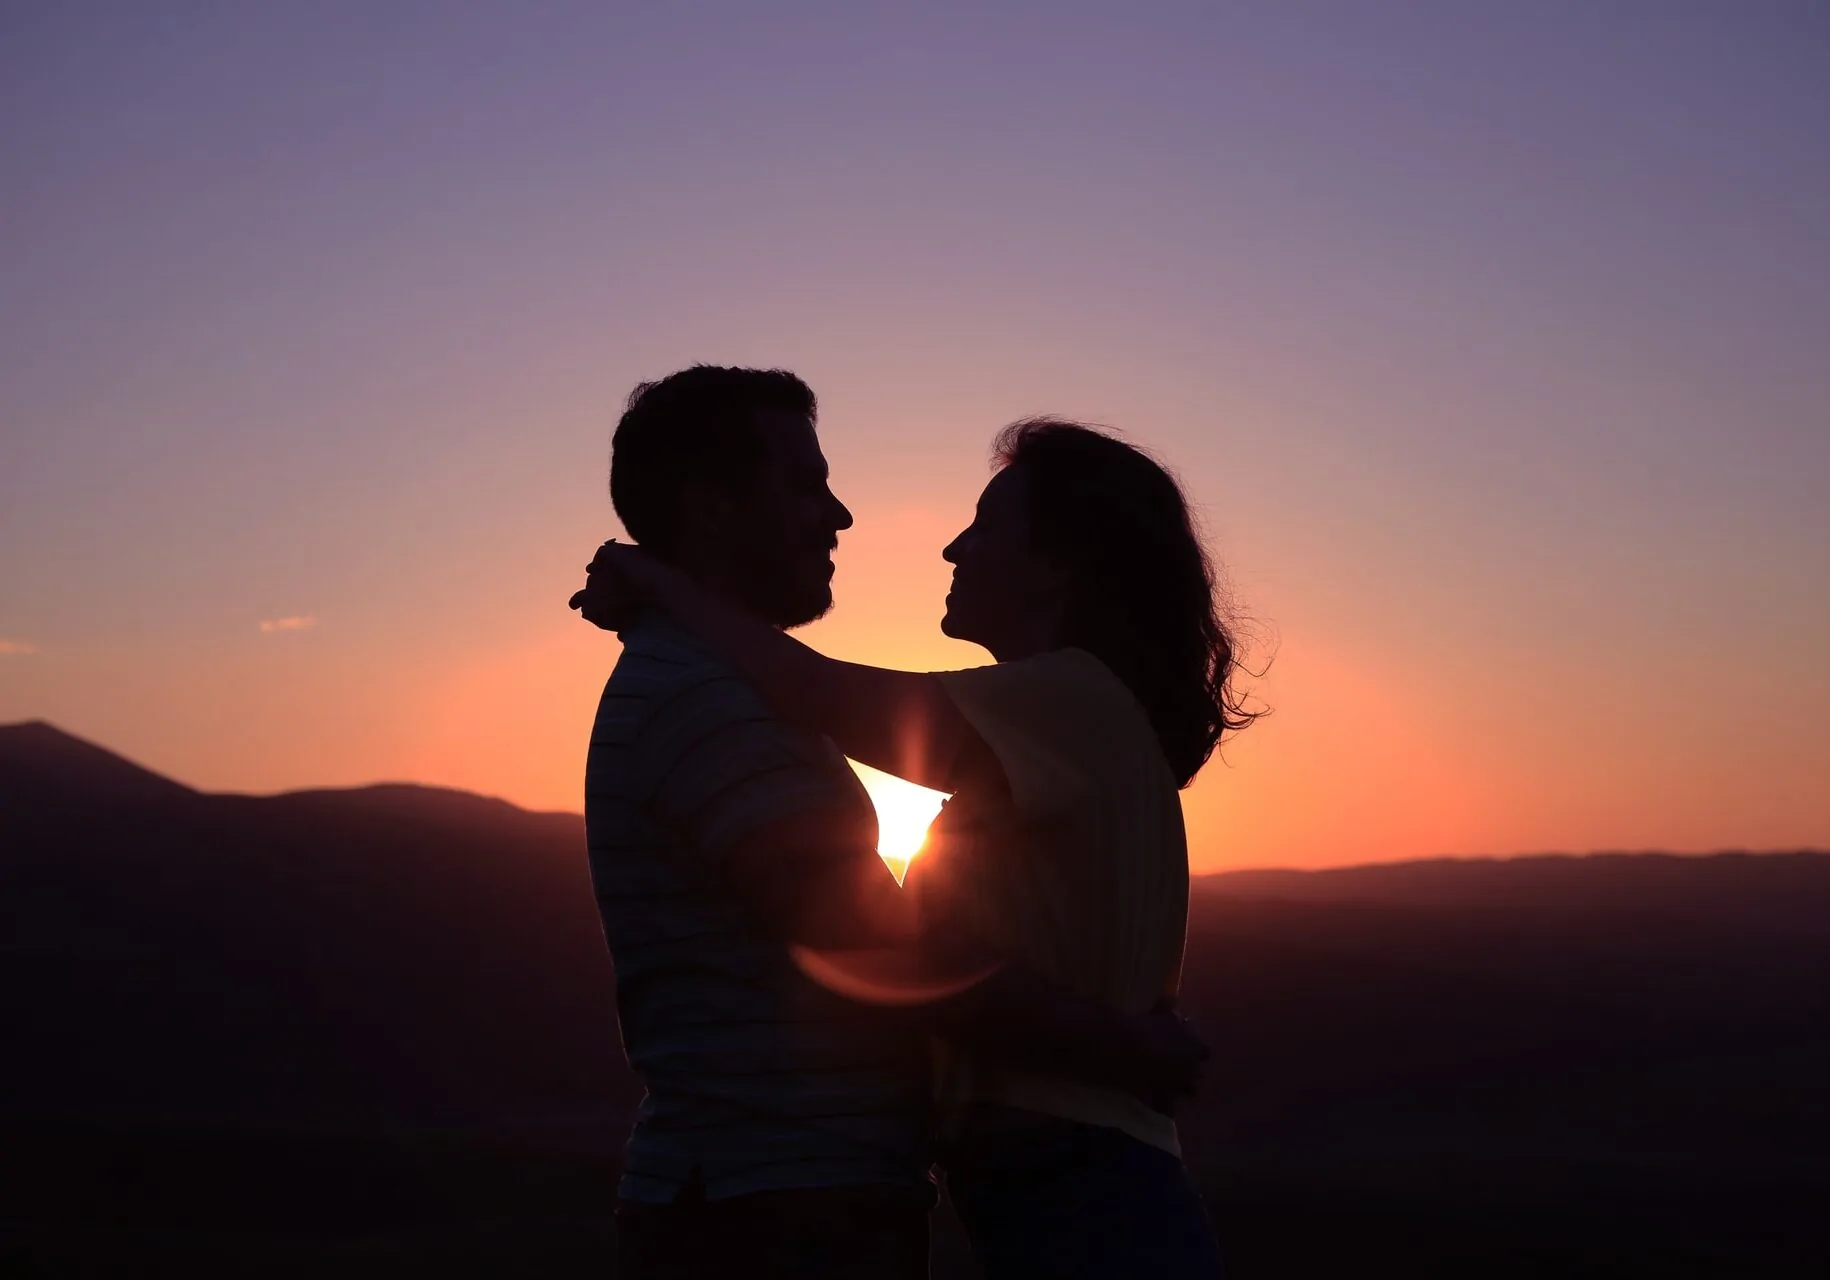 A couple embraces at sunset